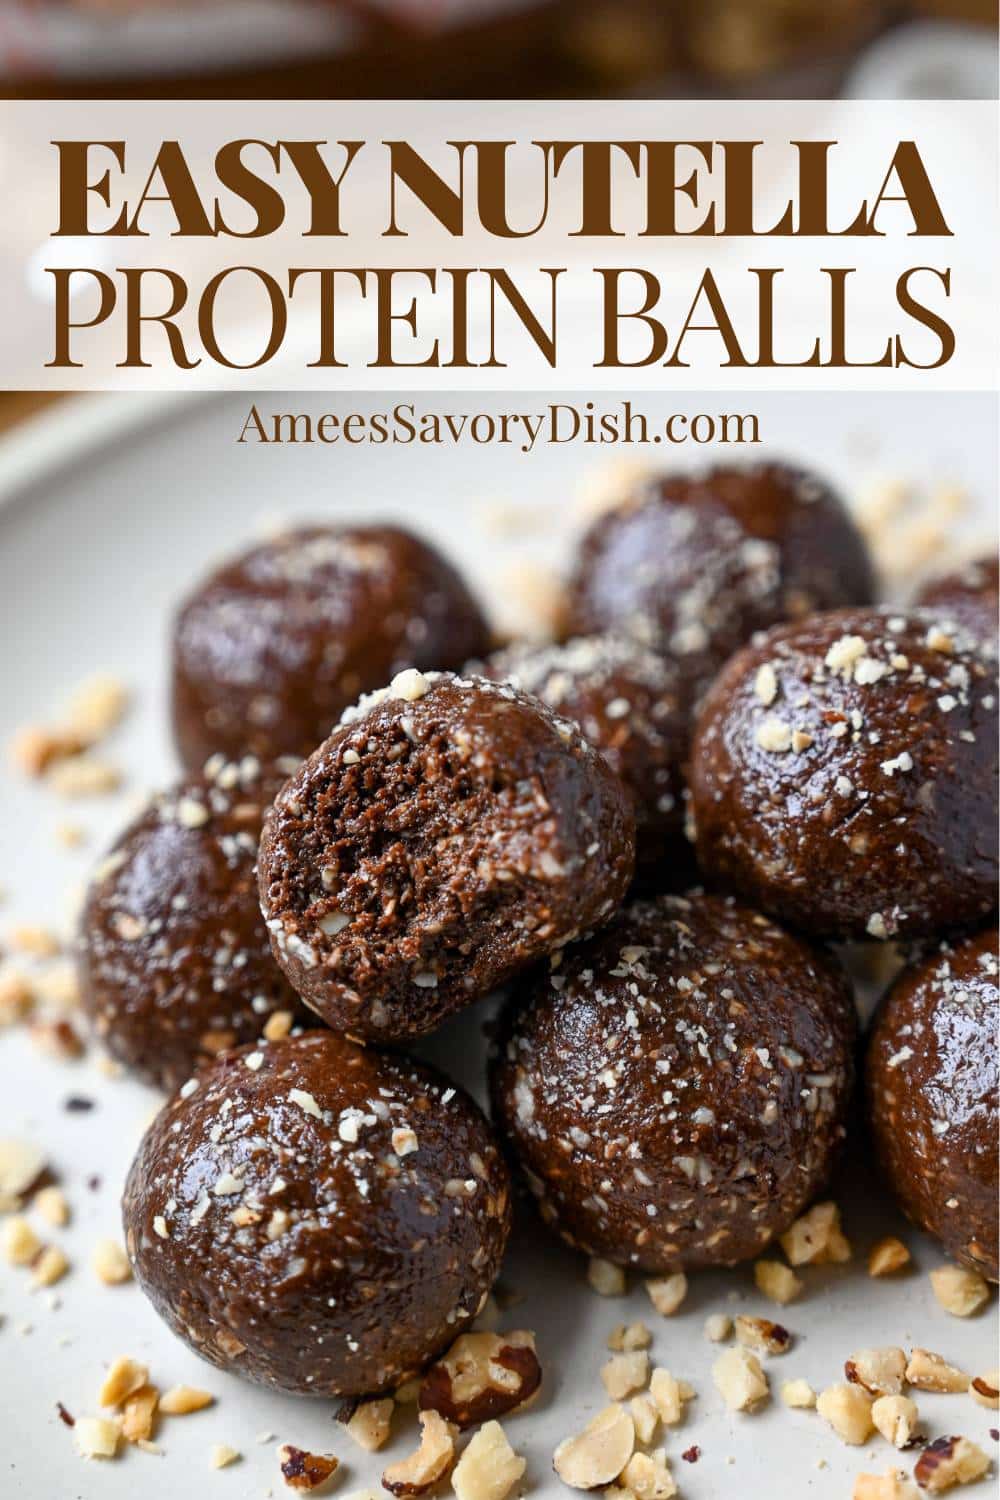 Calling all Nutella lovers! These delicious Nutella protein balls are easy to make, nutrient-packed, and taste like a decadent sweet treat! via @Ameessavorydish